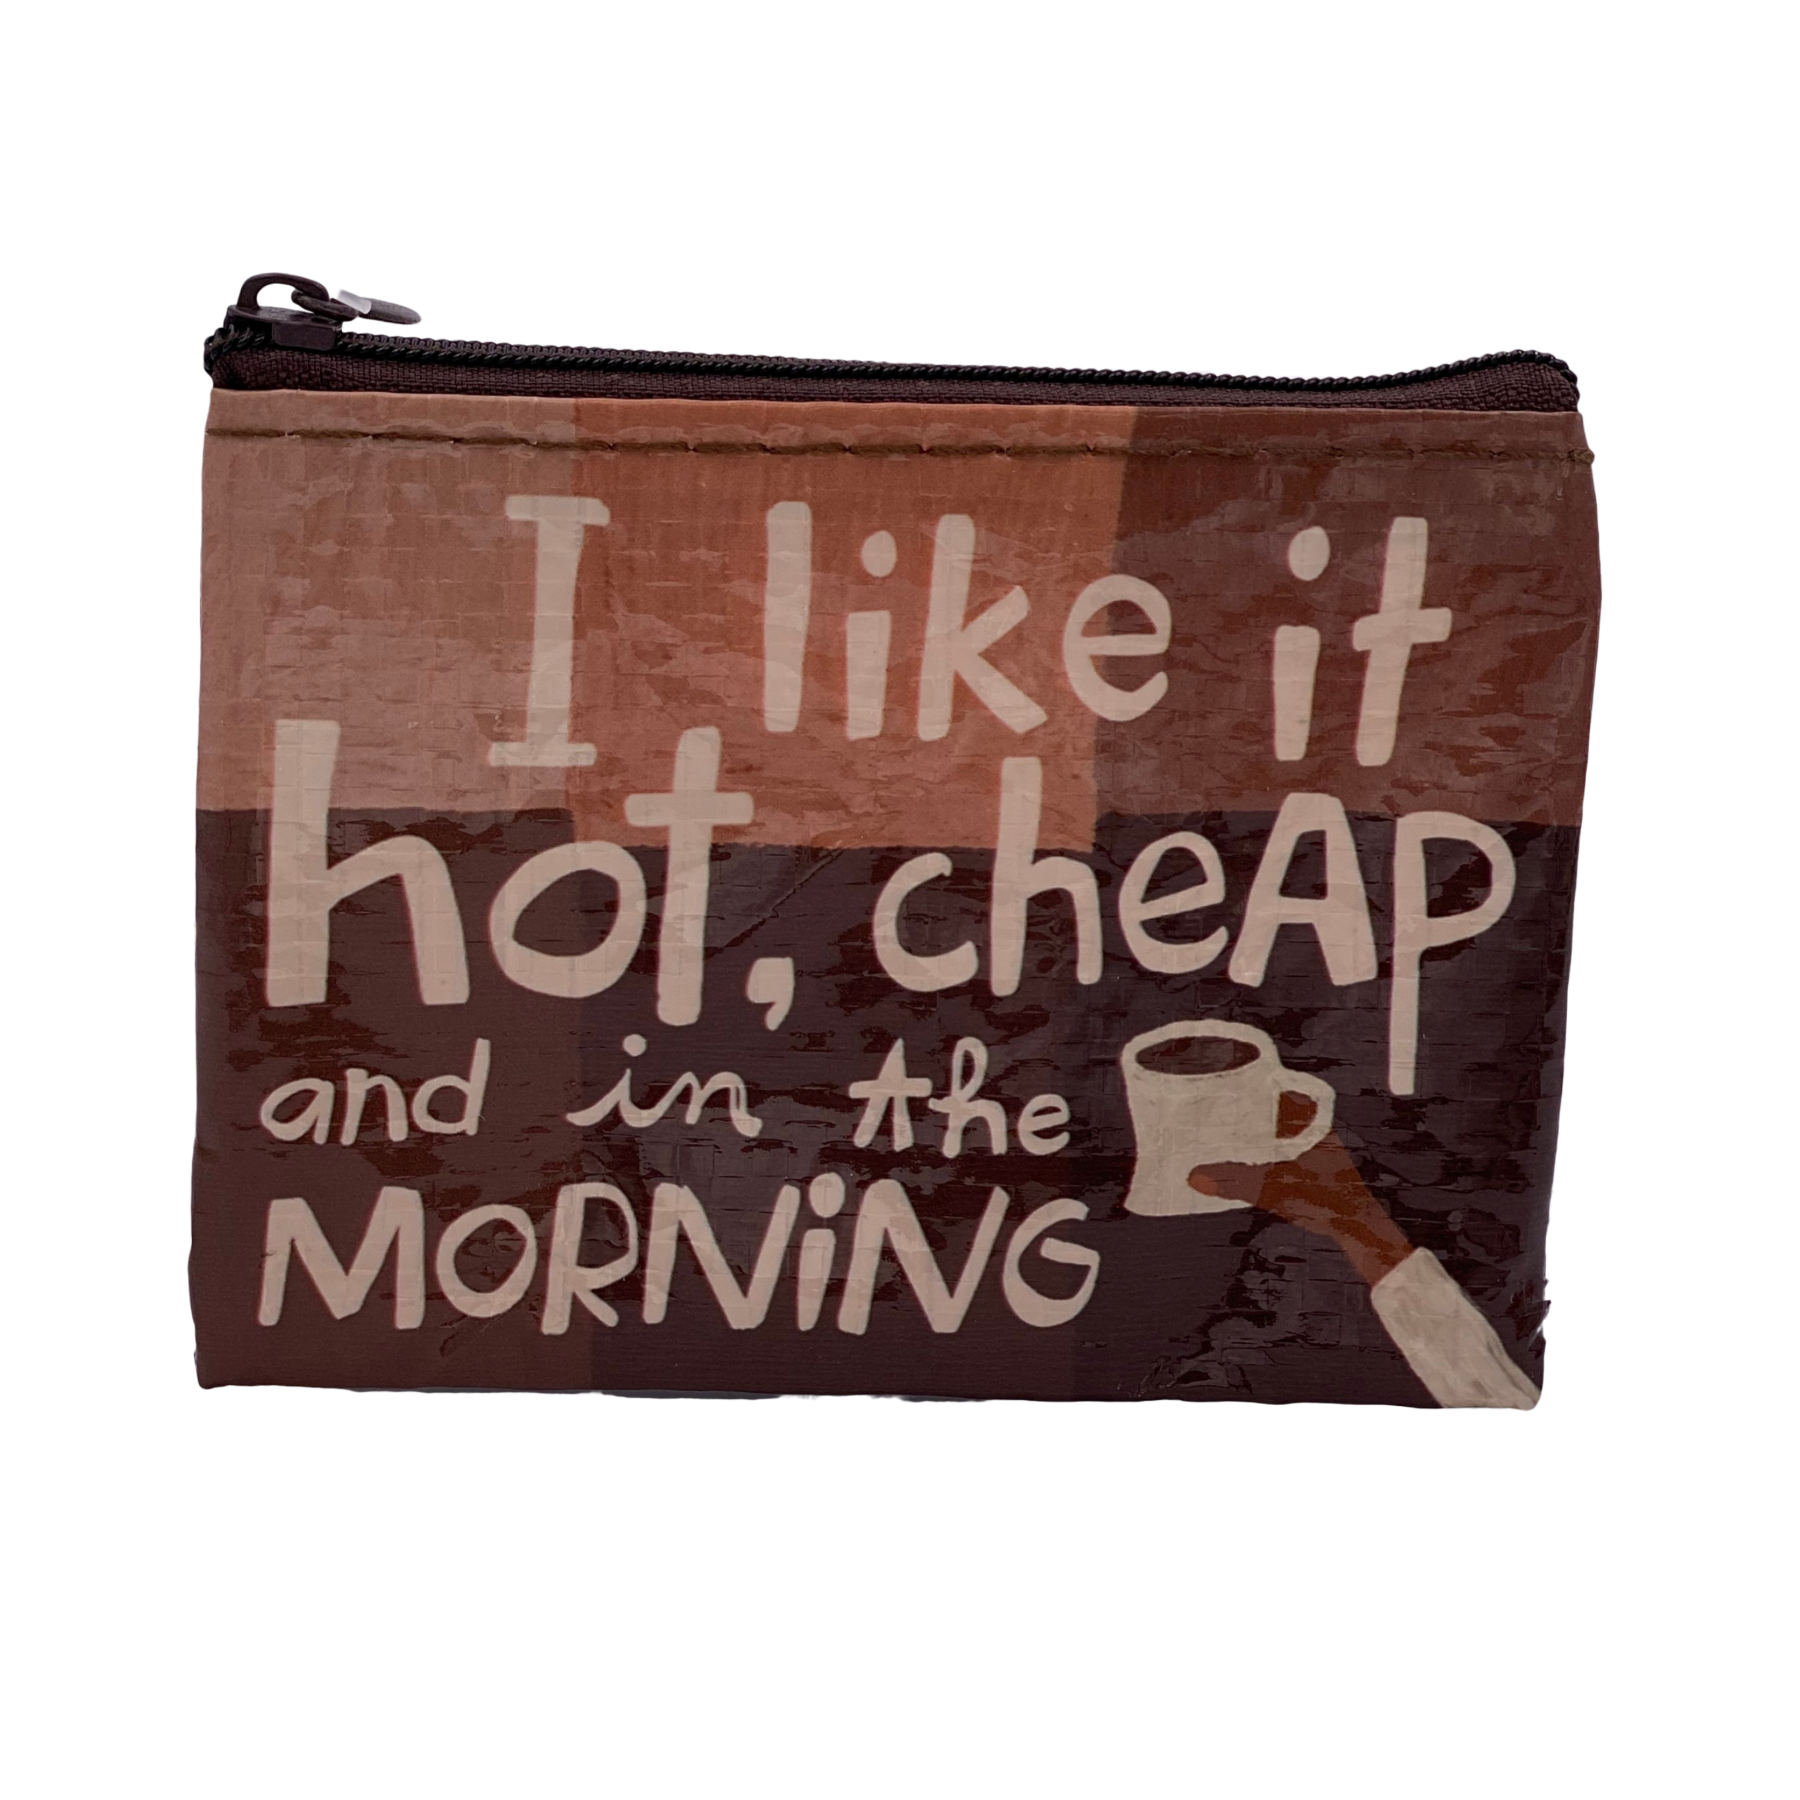 I like it hot, cheap and in the morning Coin Purse